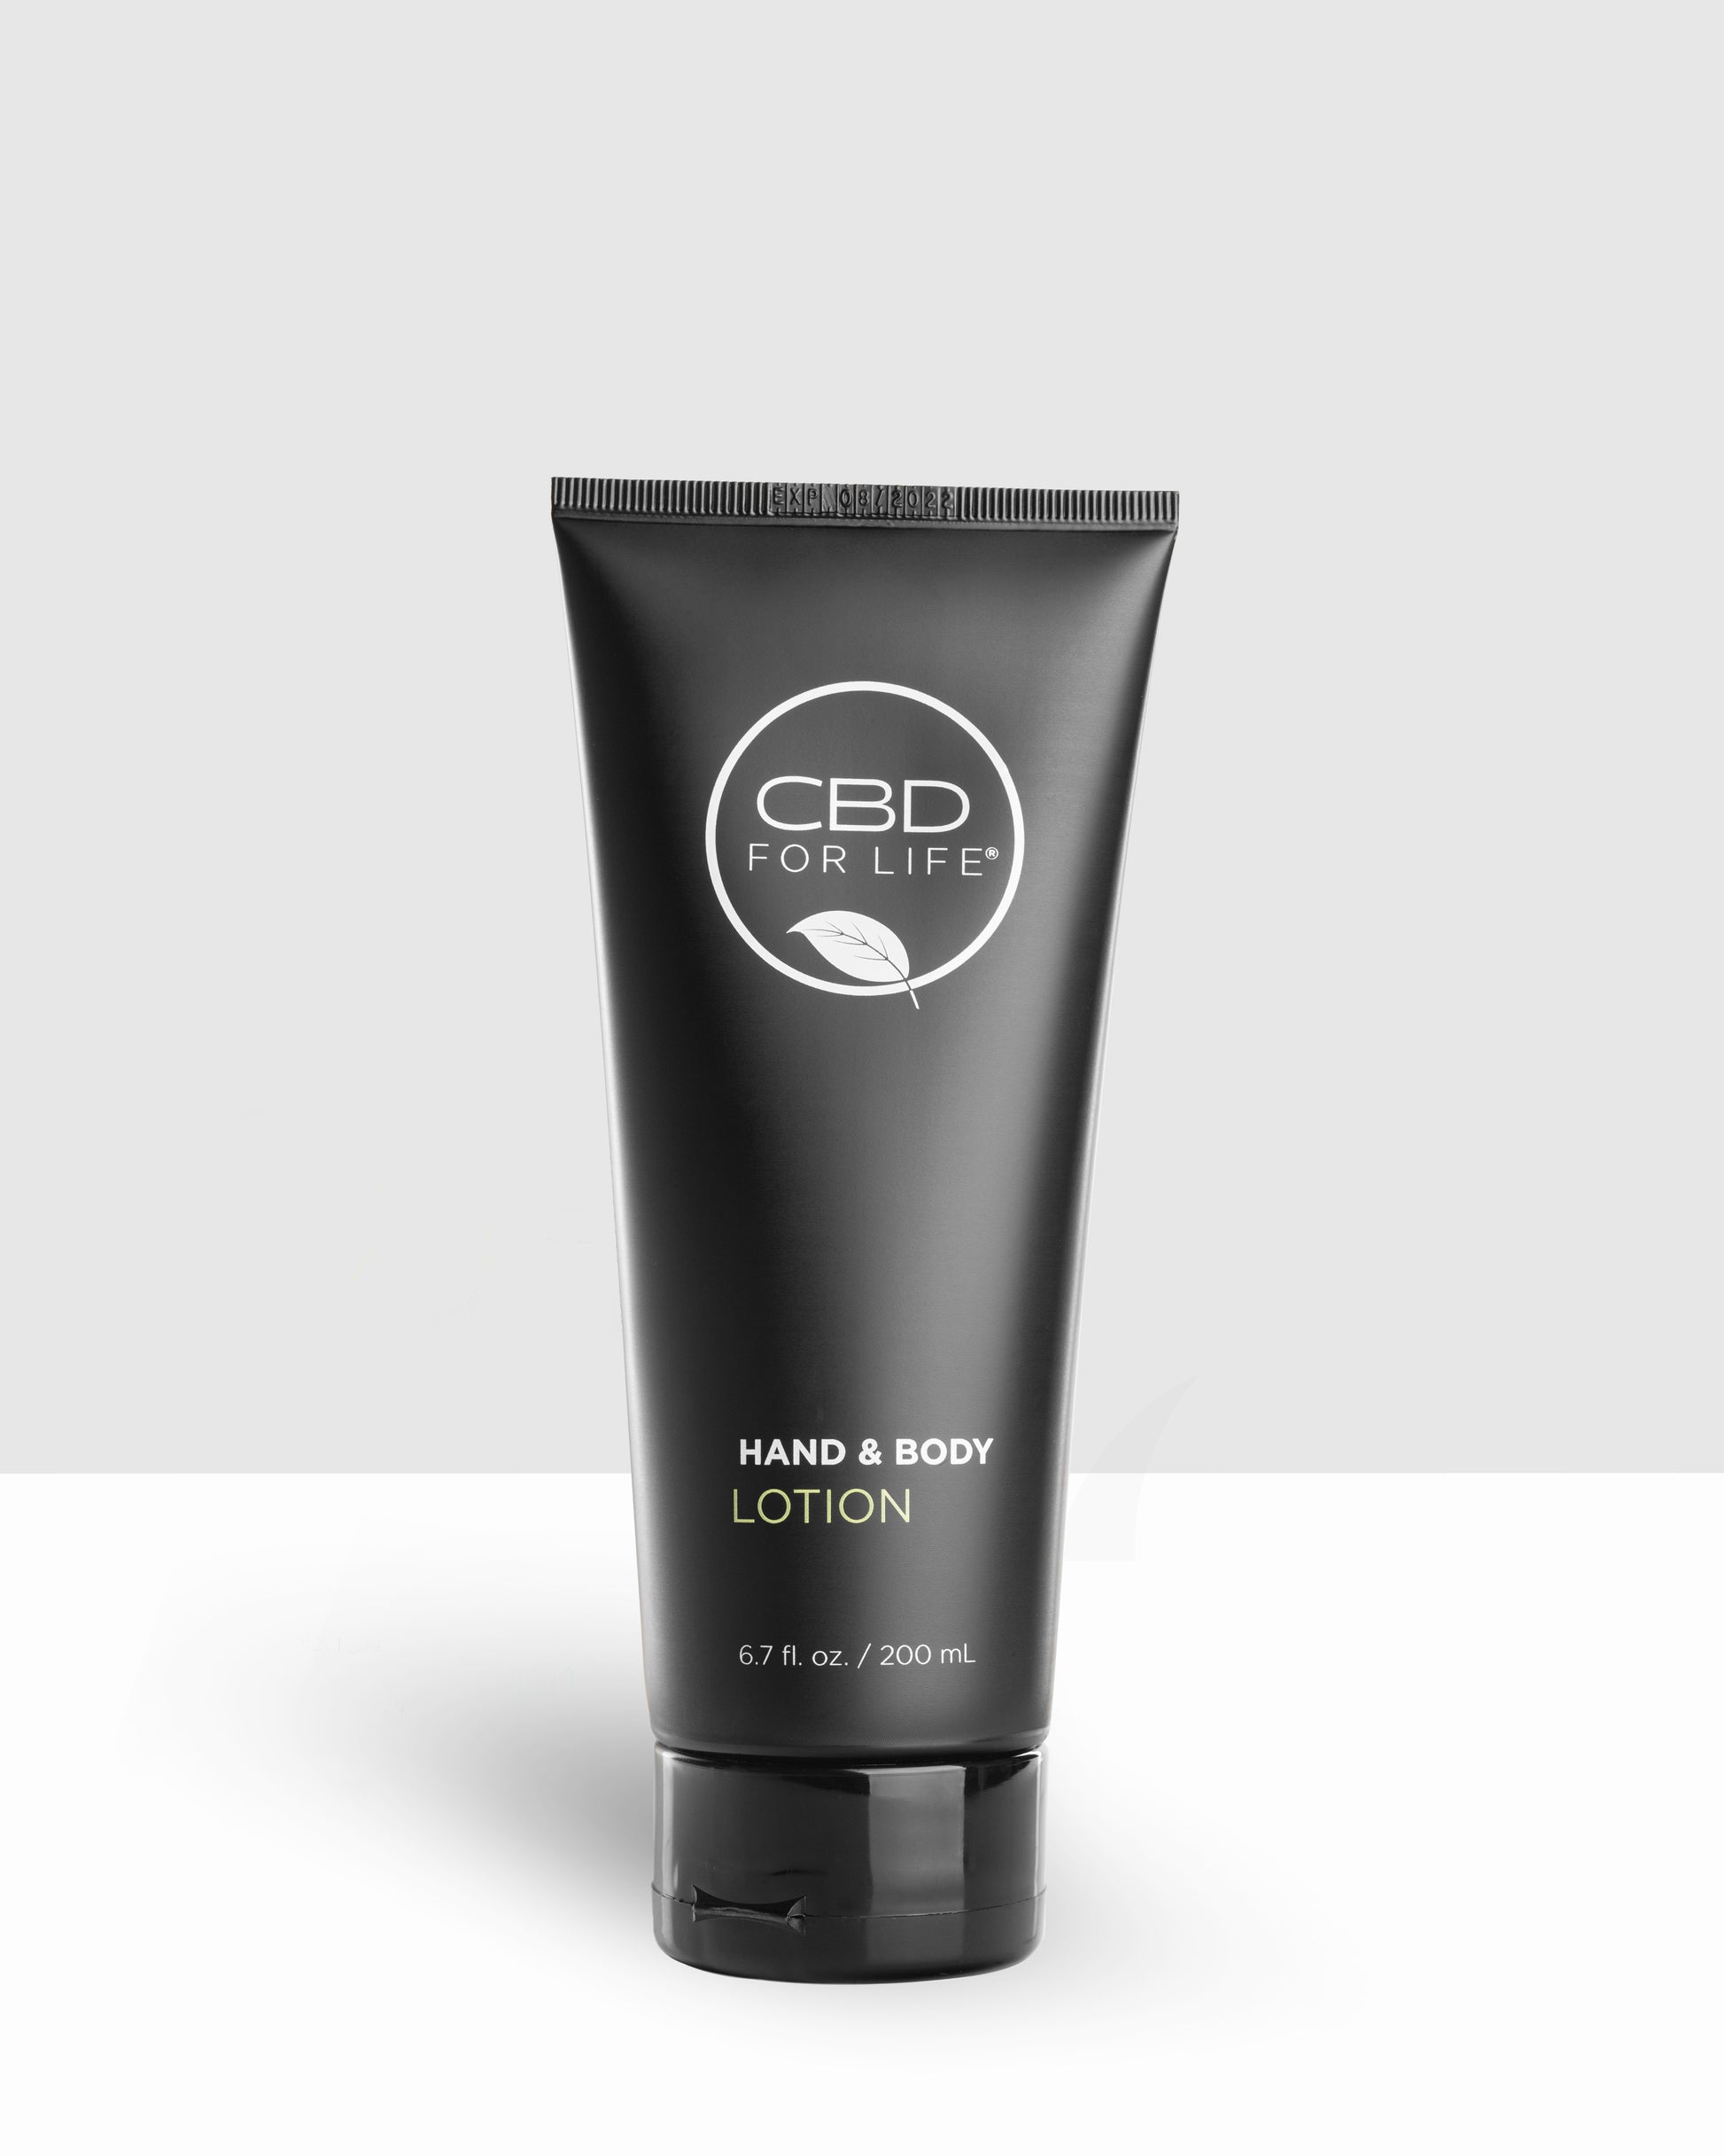 Your skin, only so much softer. The multiple benefits of CBD are evident with every slather of our CBD Hand and Body Lotion. Blanket skin in rich, comforting hydration that absorbs quickly and without a greasy residue. With every application of our CBD Hand and Body Lotion skin looks and feels refreshed. The creamy texture of our CBD Hand and Body Lotion is smooth and silky, with a  lightweight feel. Our CBD Hand and Body Lotion is perfect to use year round, on all parts of the body.